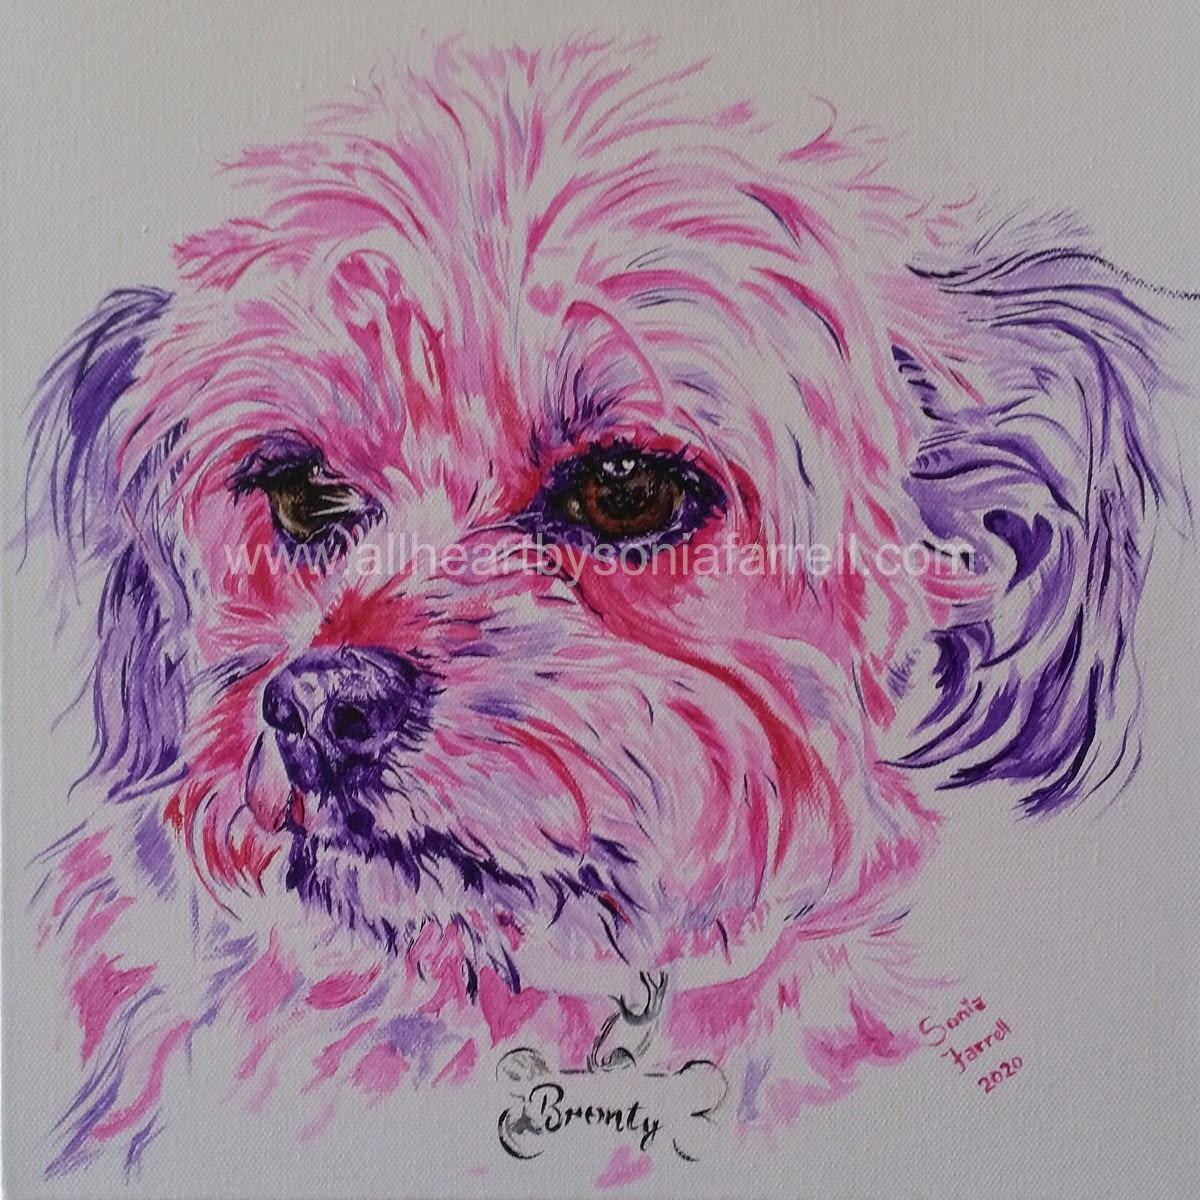 More about Bronty the Maltese Shih Tzu Chihuahua cross